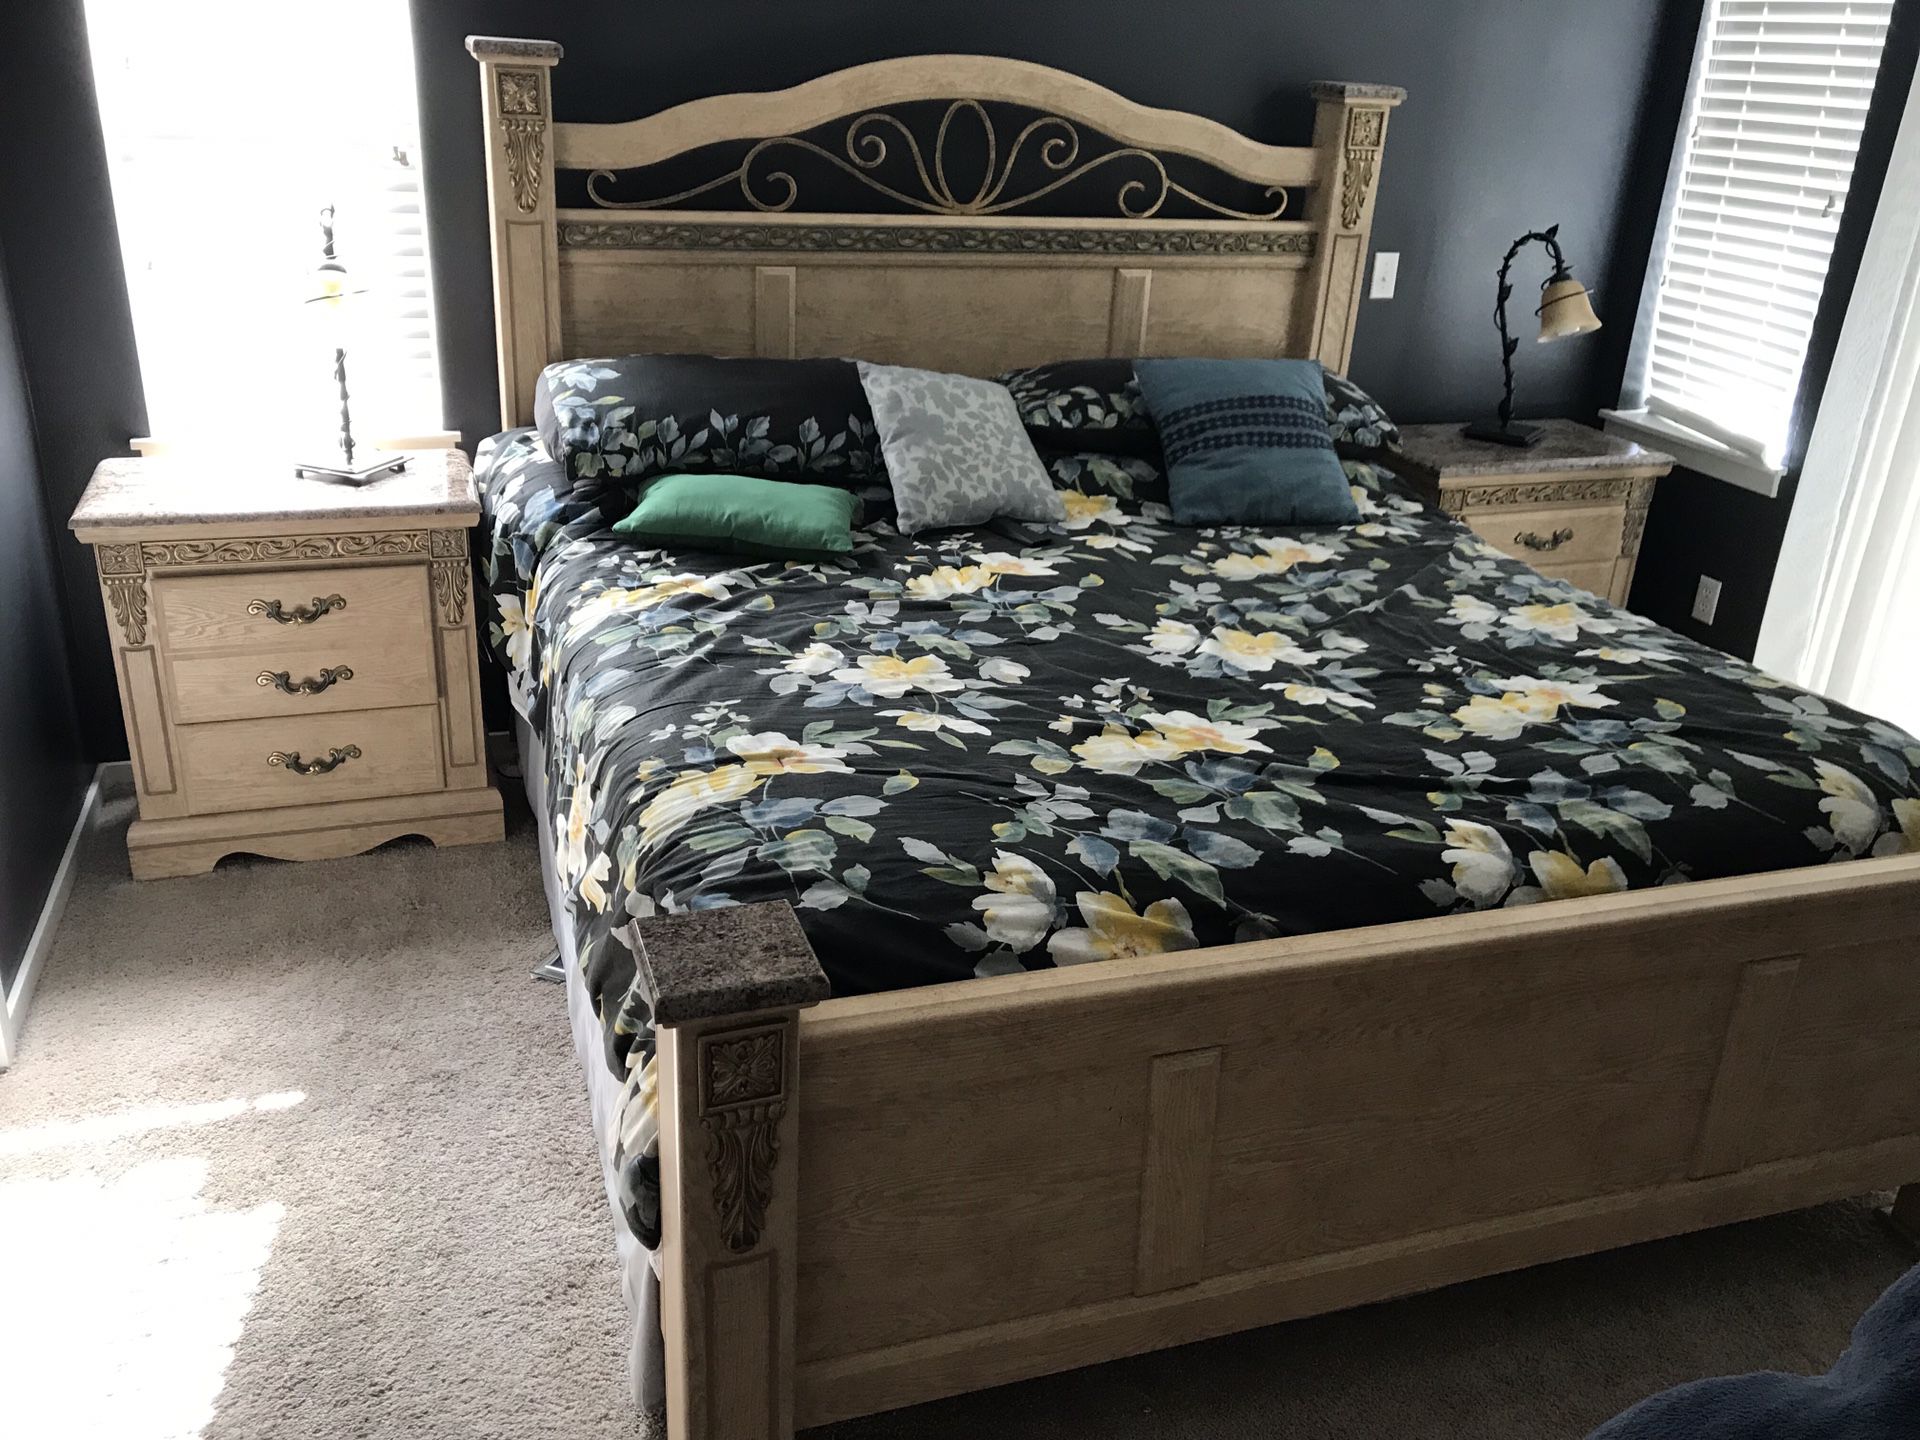 King size bedroom set. Includes head and foot boards, two night tables with lamps and the dresser.